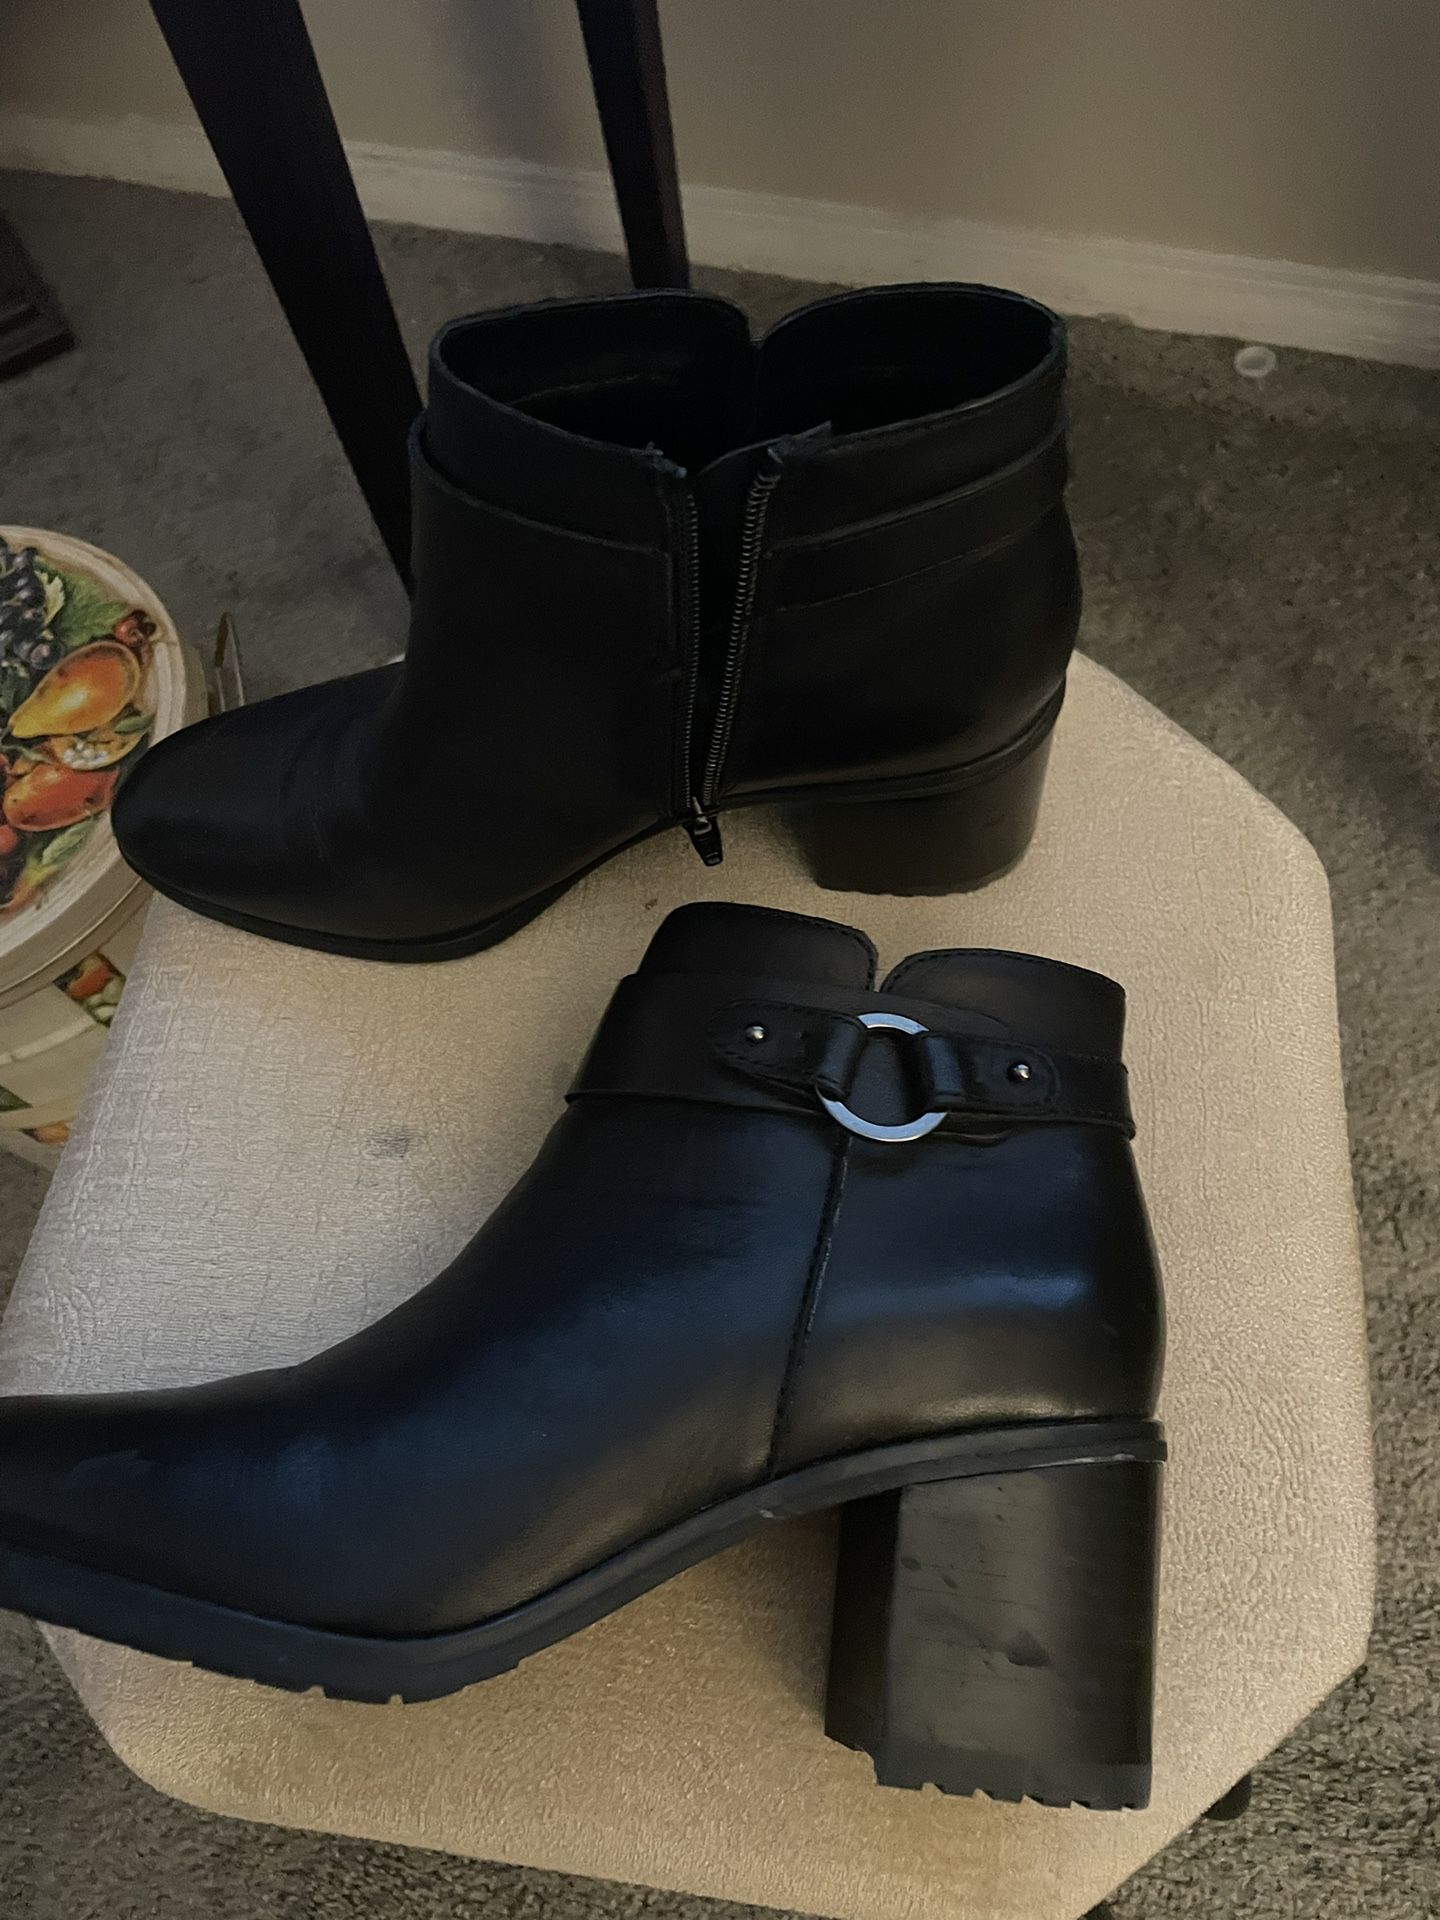 Naturalizer- Never Worn- Black Leather Boots- Size 9